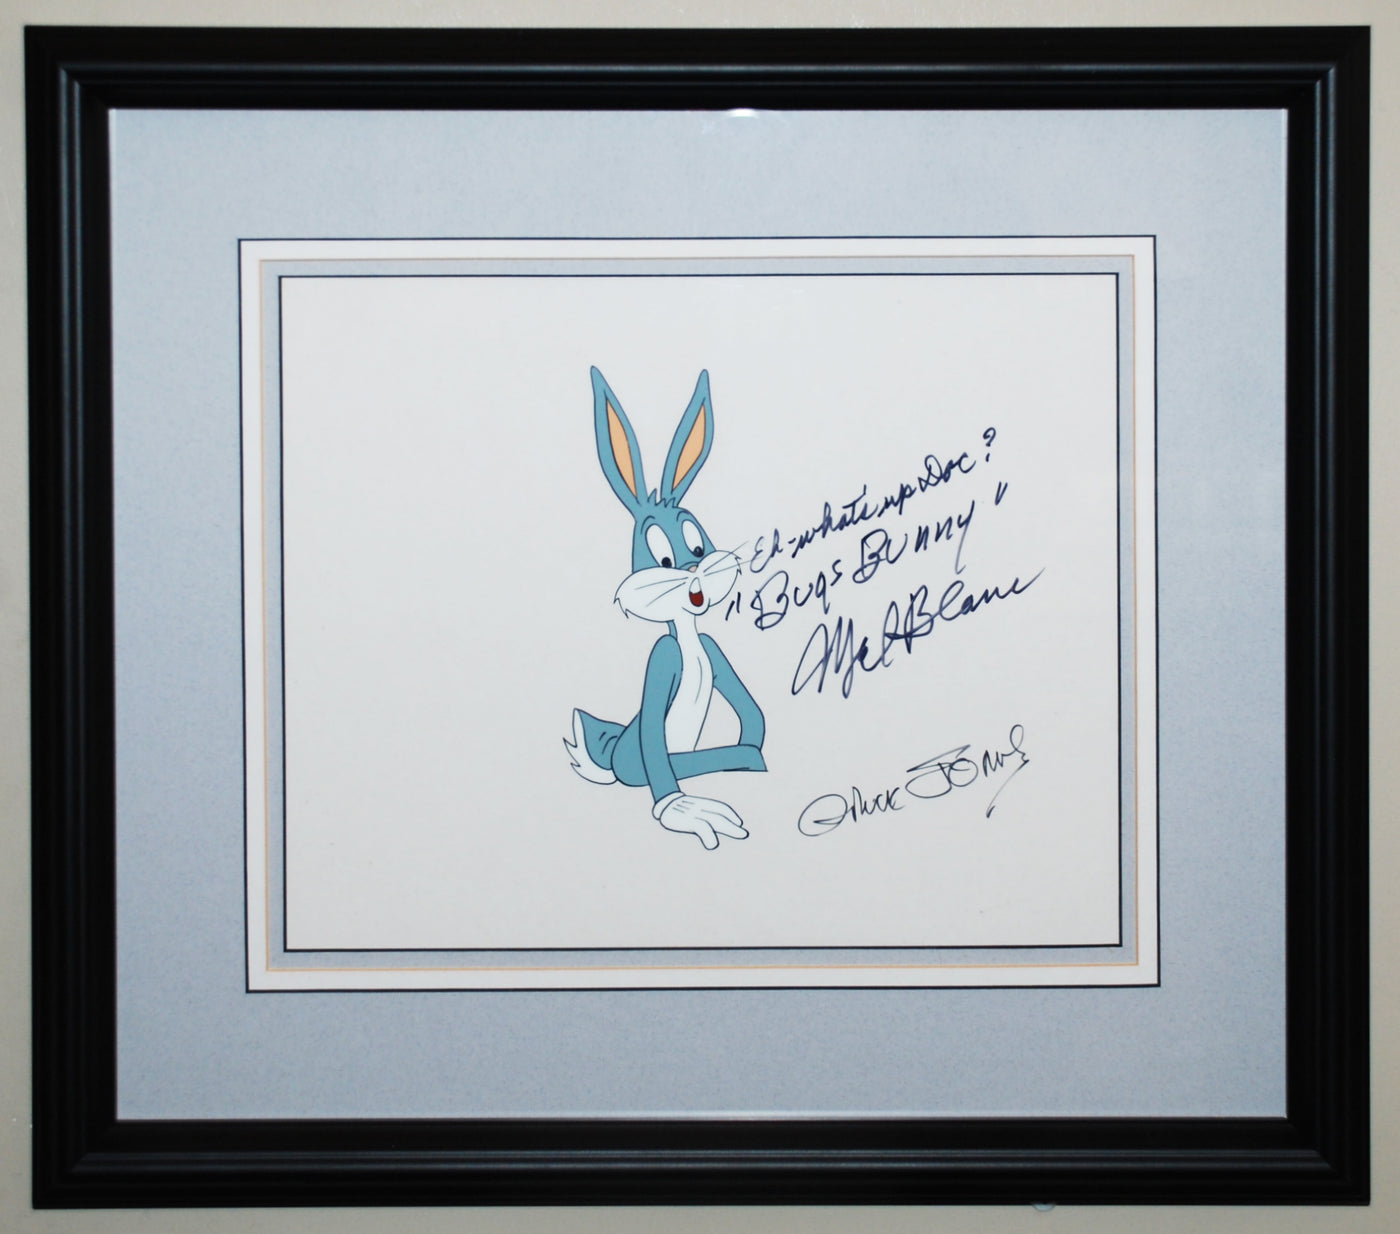 Original Warner Brothers Production Cel Featuring Bugs Bunny, Signed by Mel Blanc and Chuck Jones